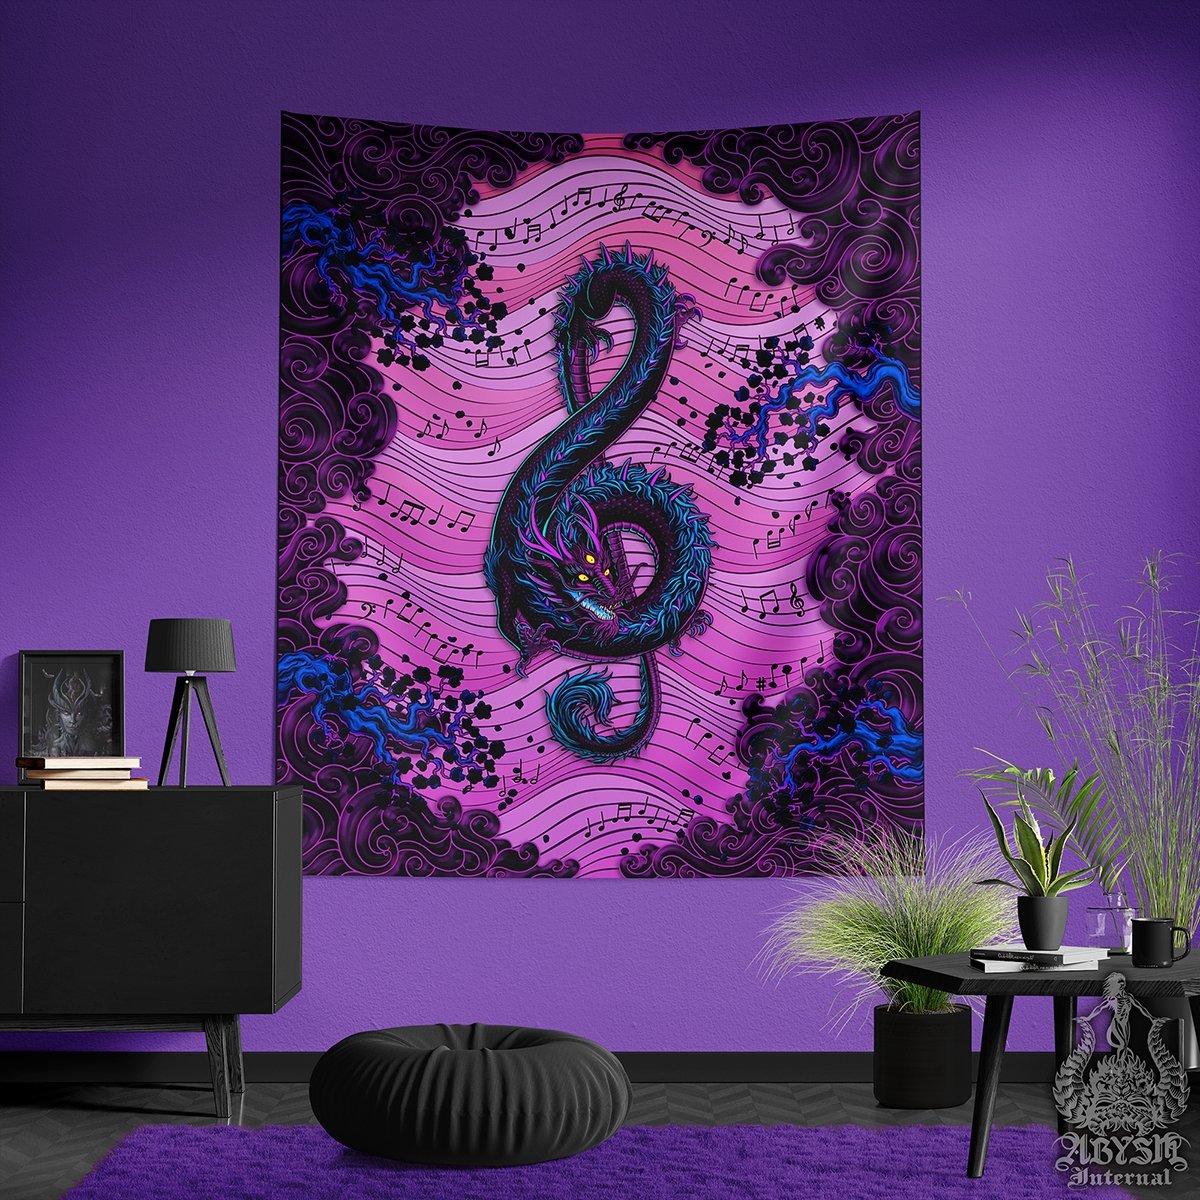 Pastel Goth Tapestry, Music Wall Hanging, Psychedelic Home Decor, Art Print - Dragon, Treble Clef - Abysm Internal